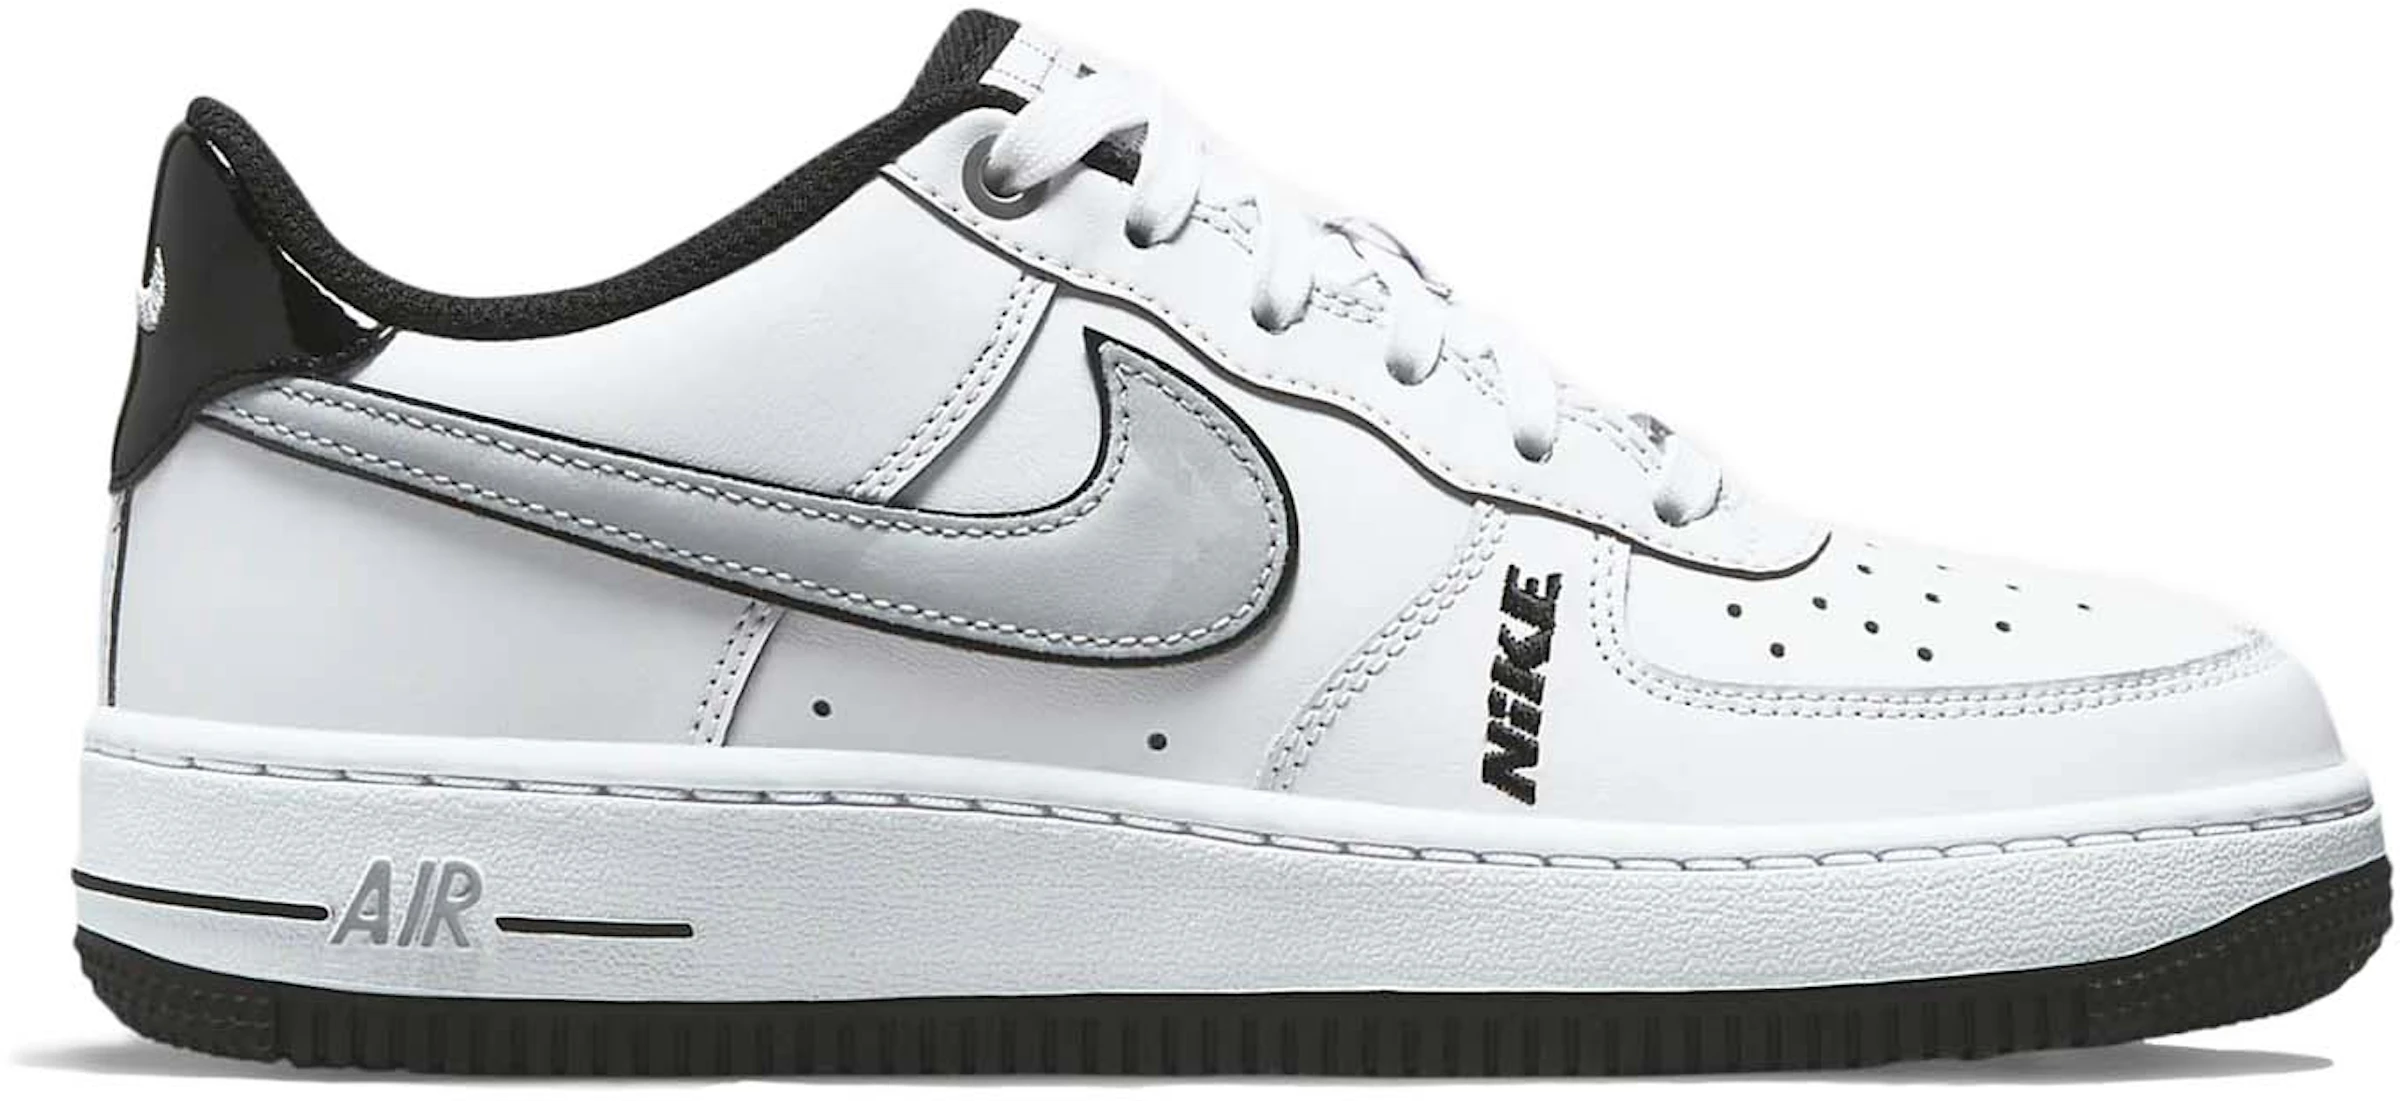 Nike Air Force 1 Low LV8 White Wolf Grey Black (GS) - US